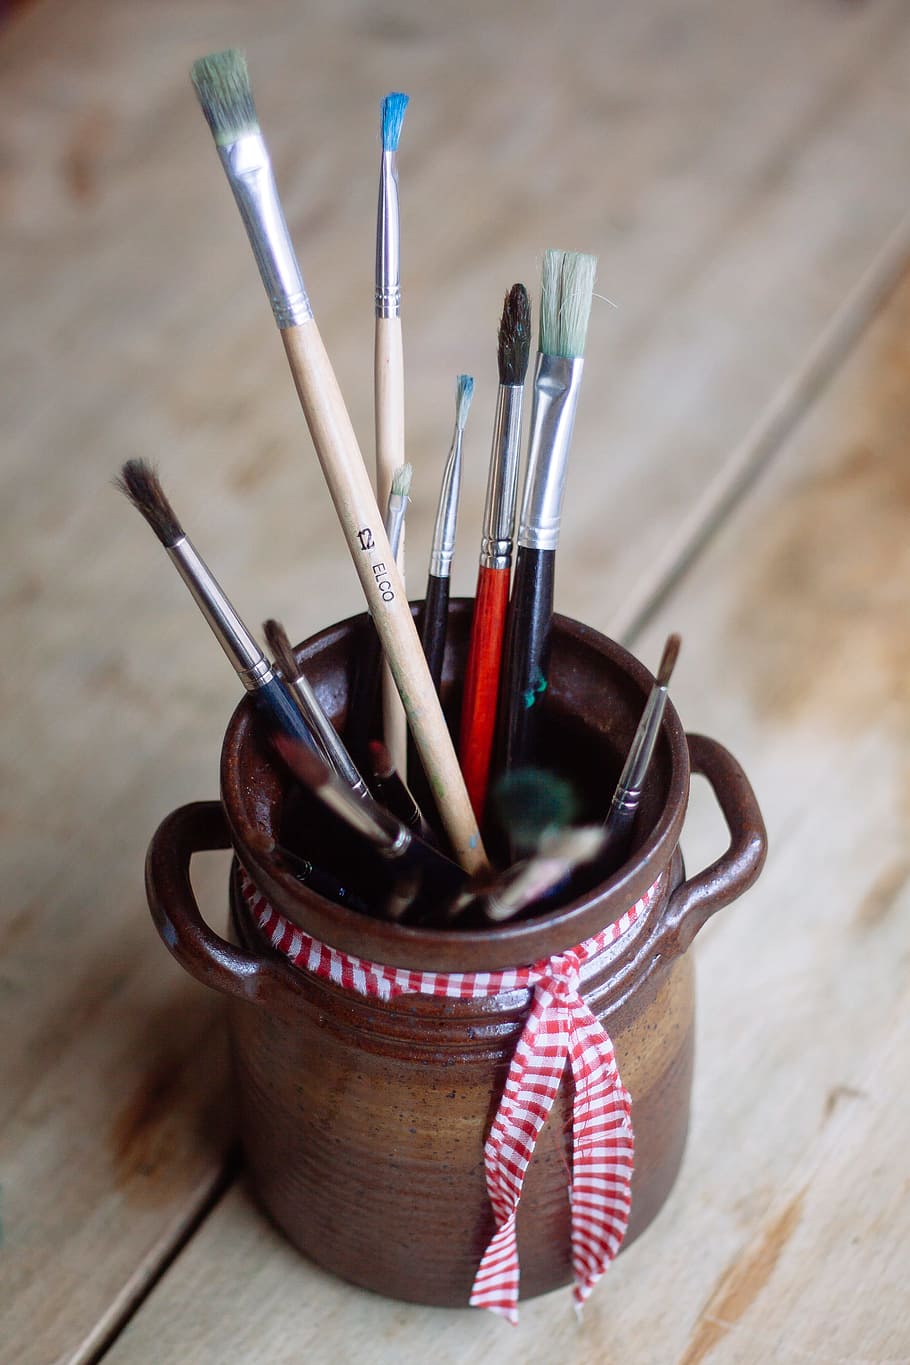 Paint Brushes in Jar, objects, paintbrush, wood - Material, artist, HD wallpaper